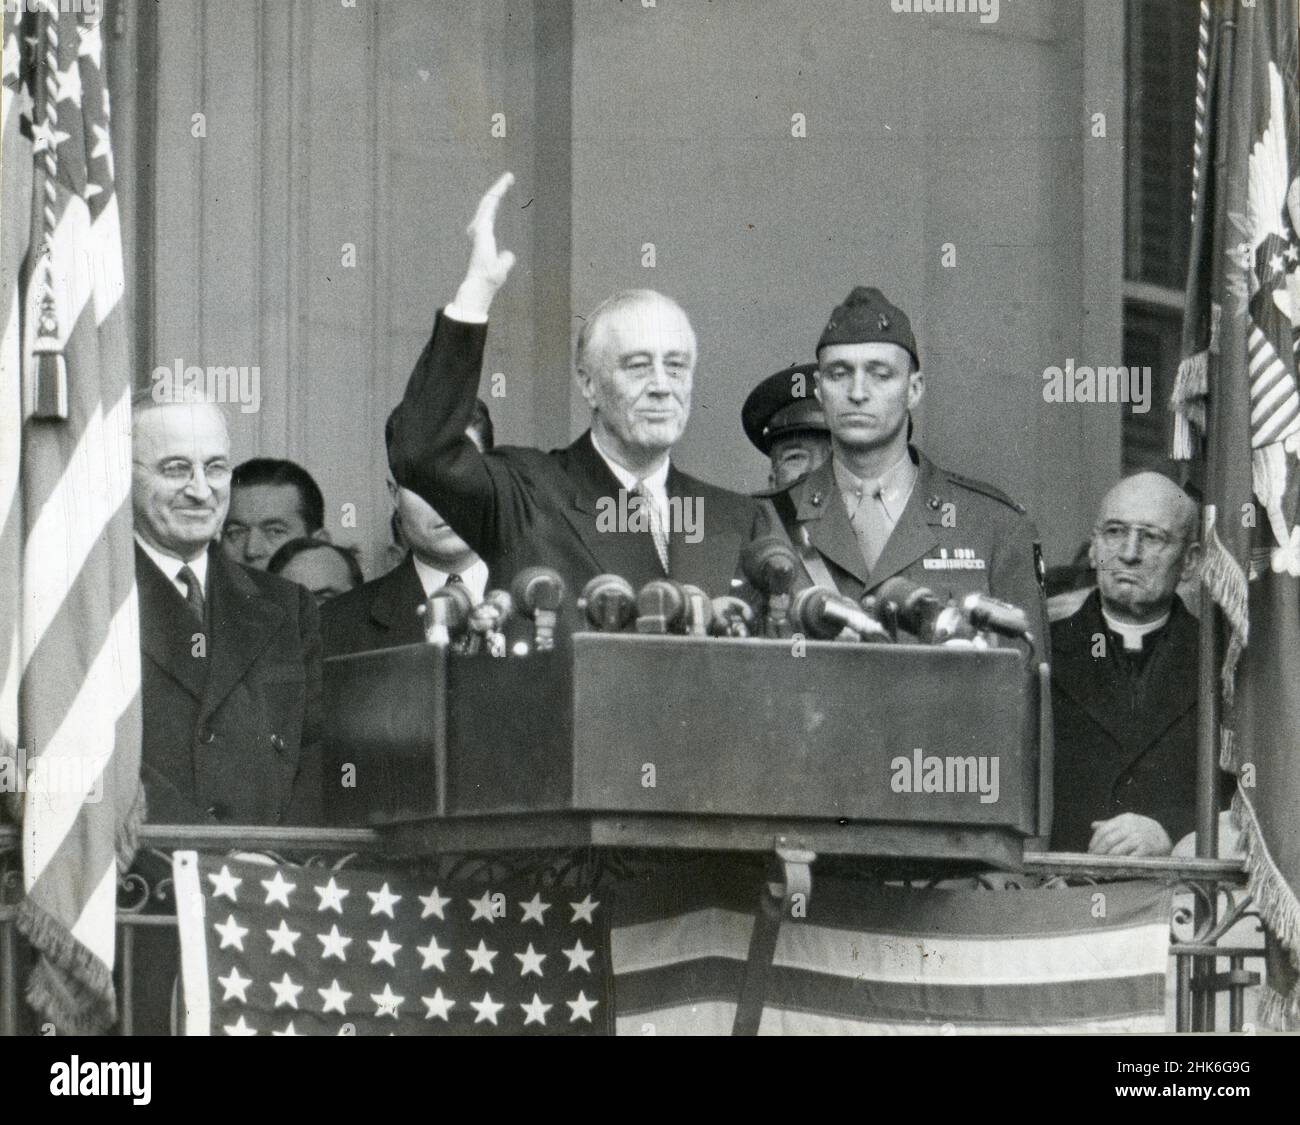 January 20, 1945, Washington, DC - Franklin Delano Roosevelt shown just after taking his 4th Oath of Office. The ceremony only lasted 15 minutes. Vice-President Harry Truman is on the left and Roosevelt's son James stands next to his father, Washington, DC. Stock Photo